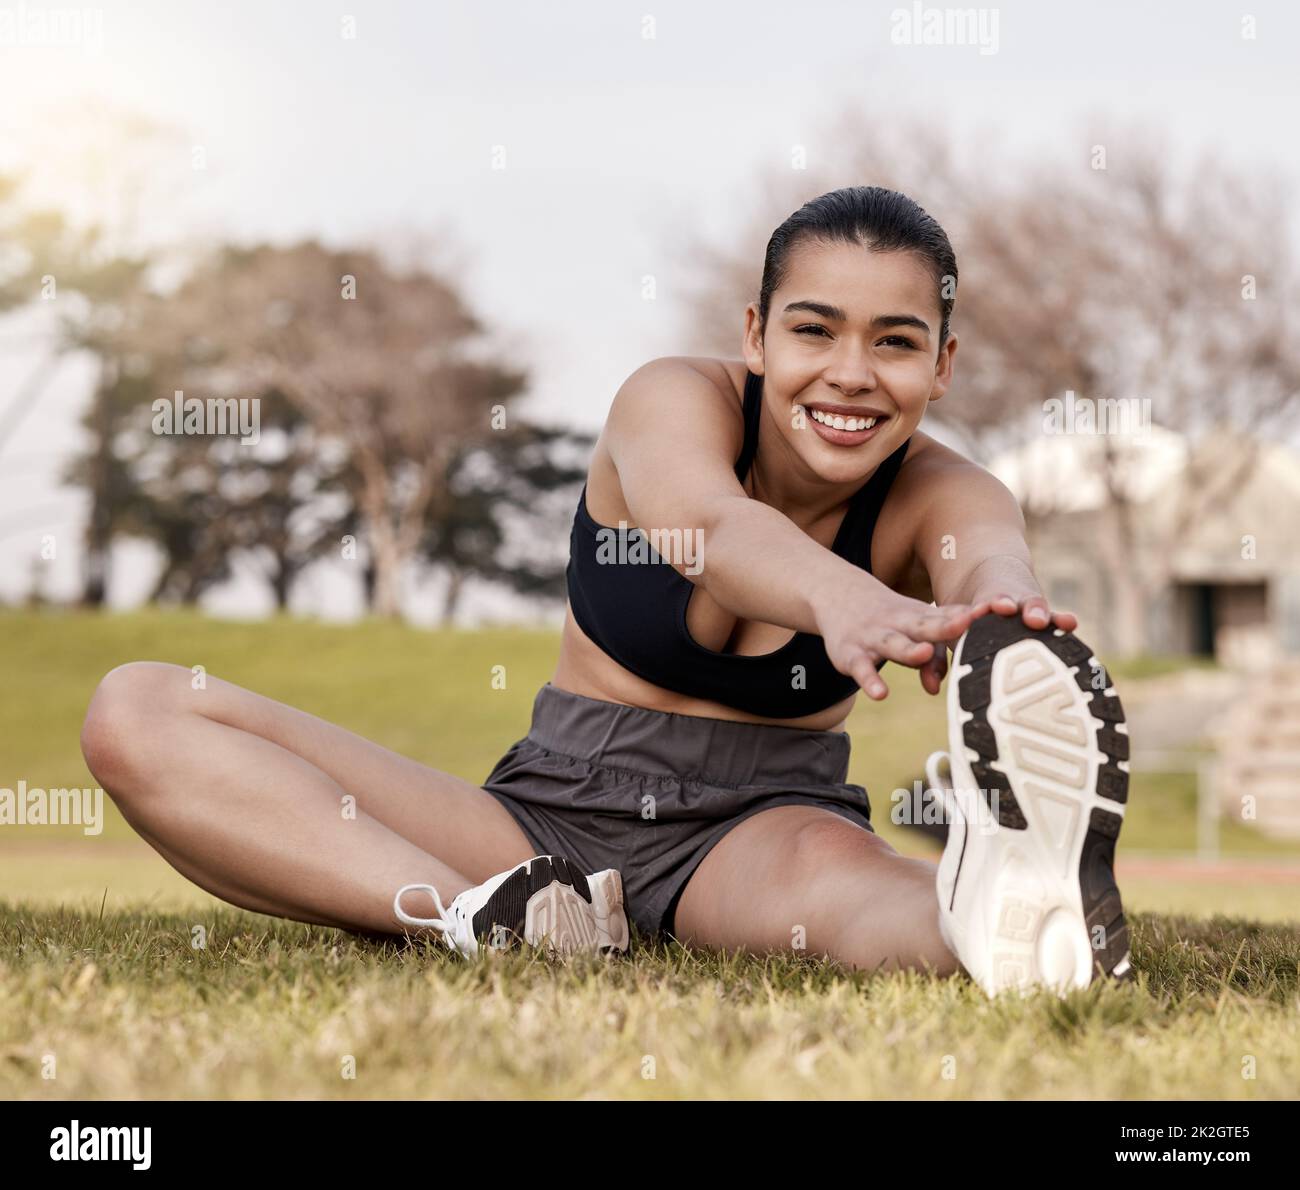 I always stretch before training. Full length shot of an attractive young woman sitting alone outside and stretching before playing sports. Stock Photo